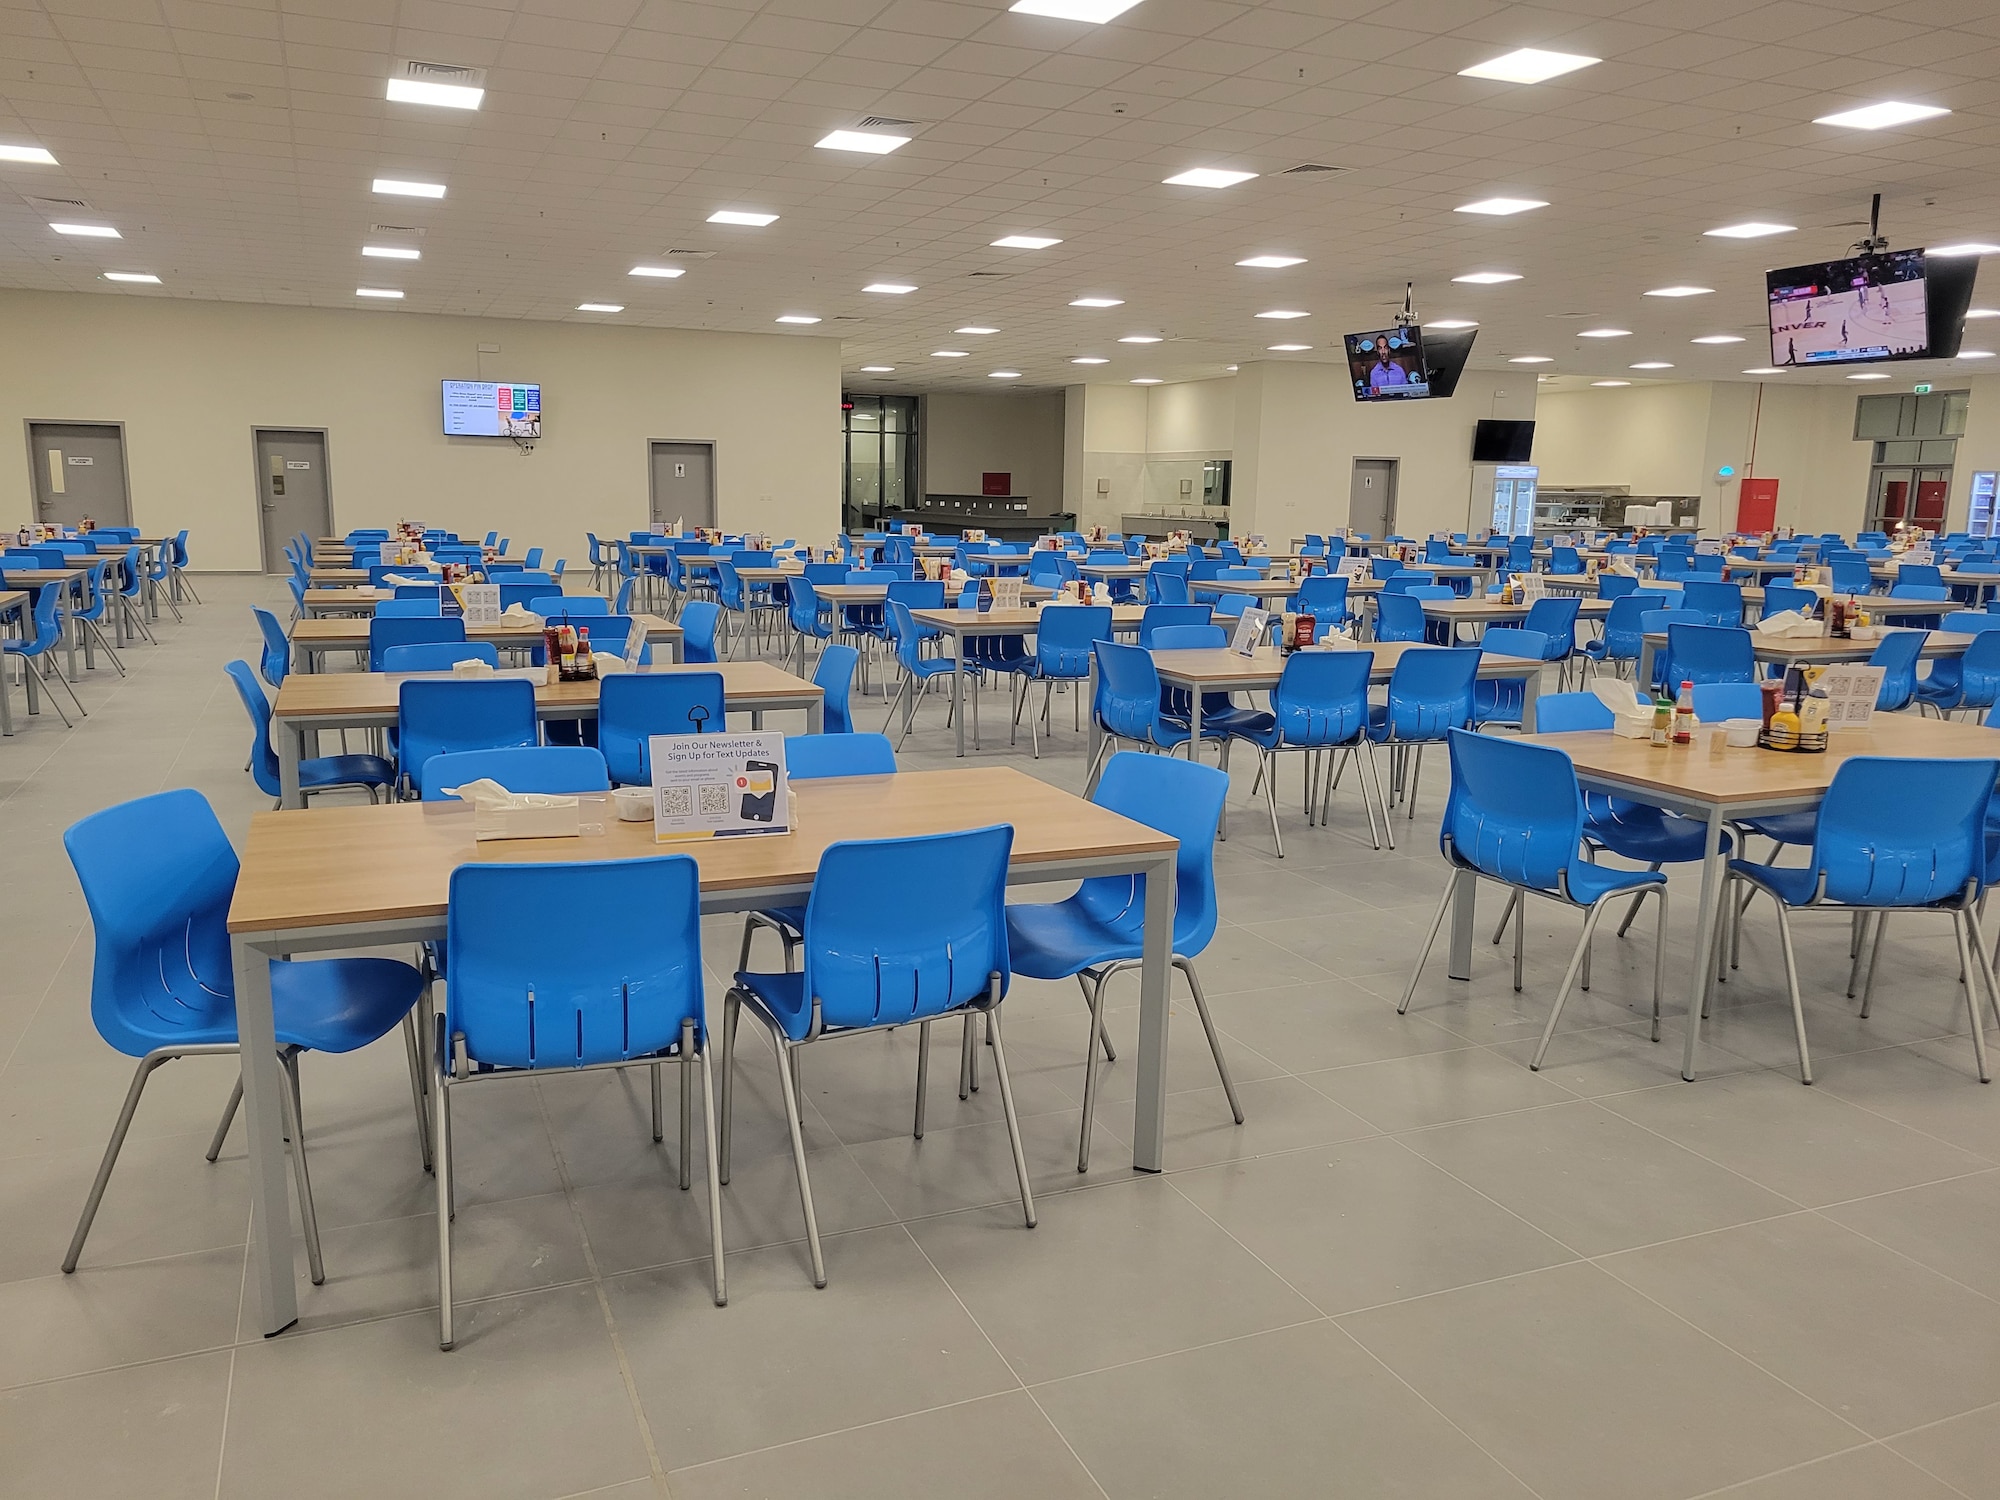 The Pearl dining facility is prepared for a grand opening.